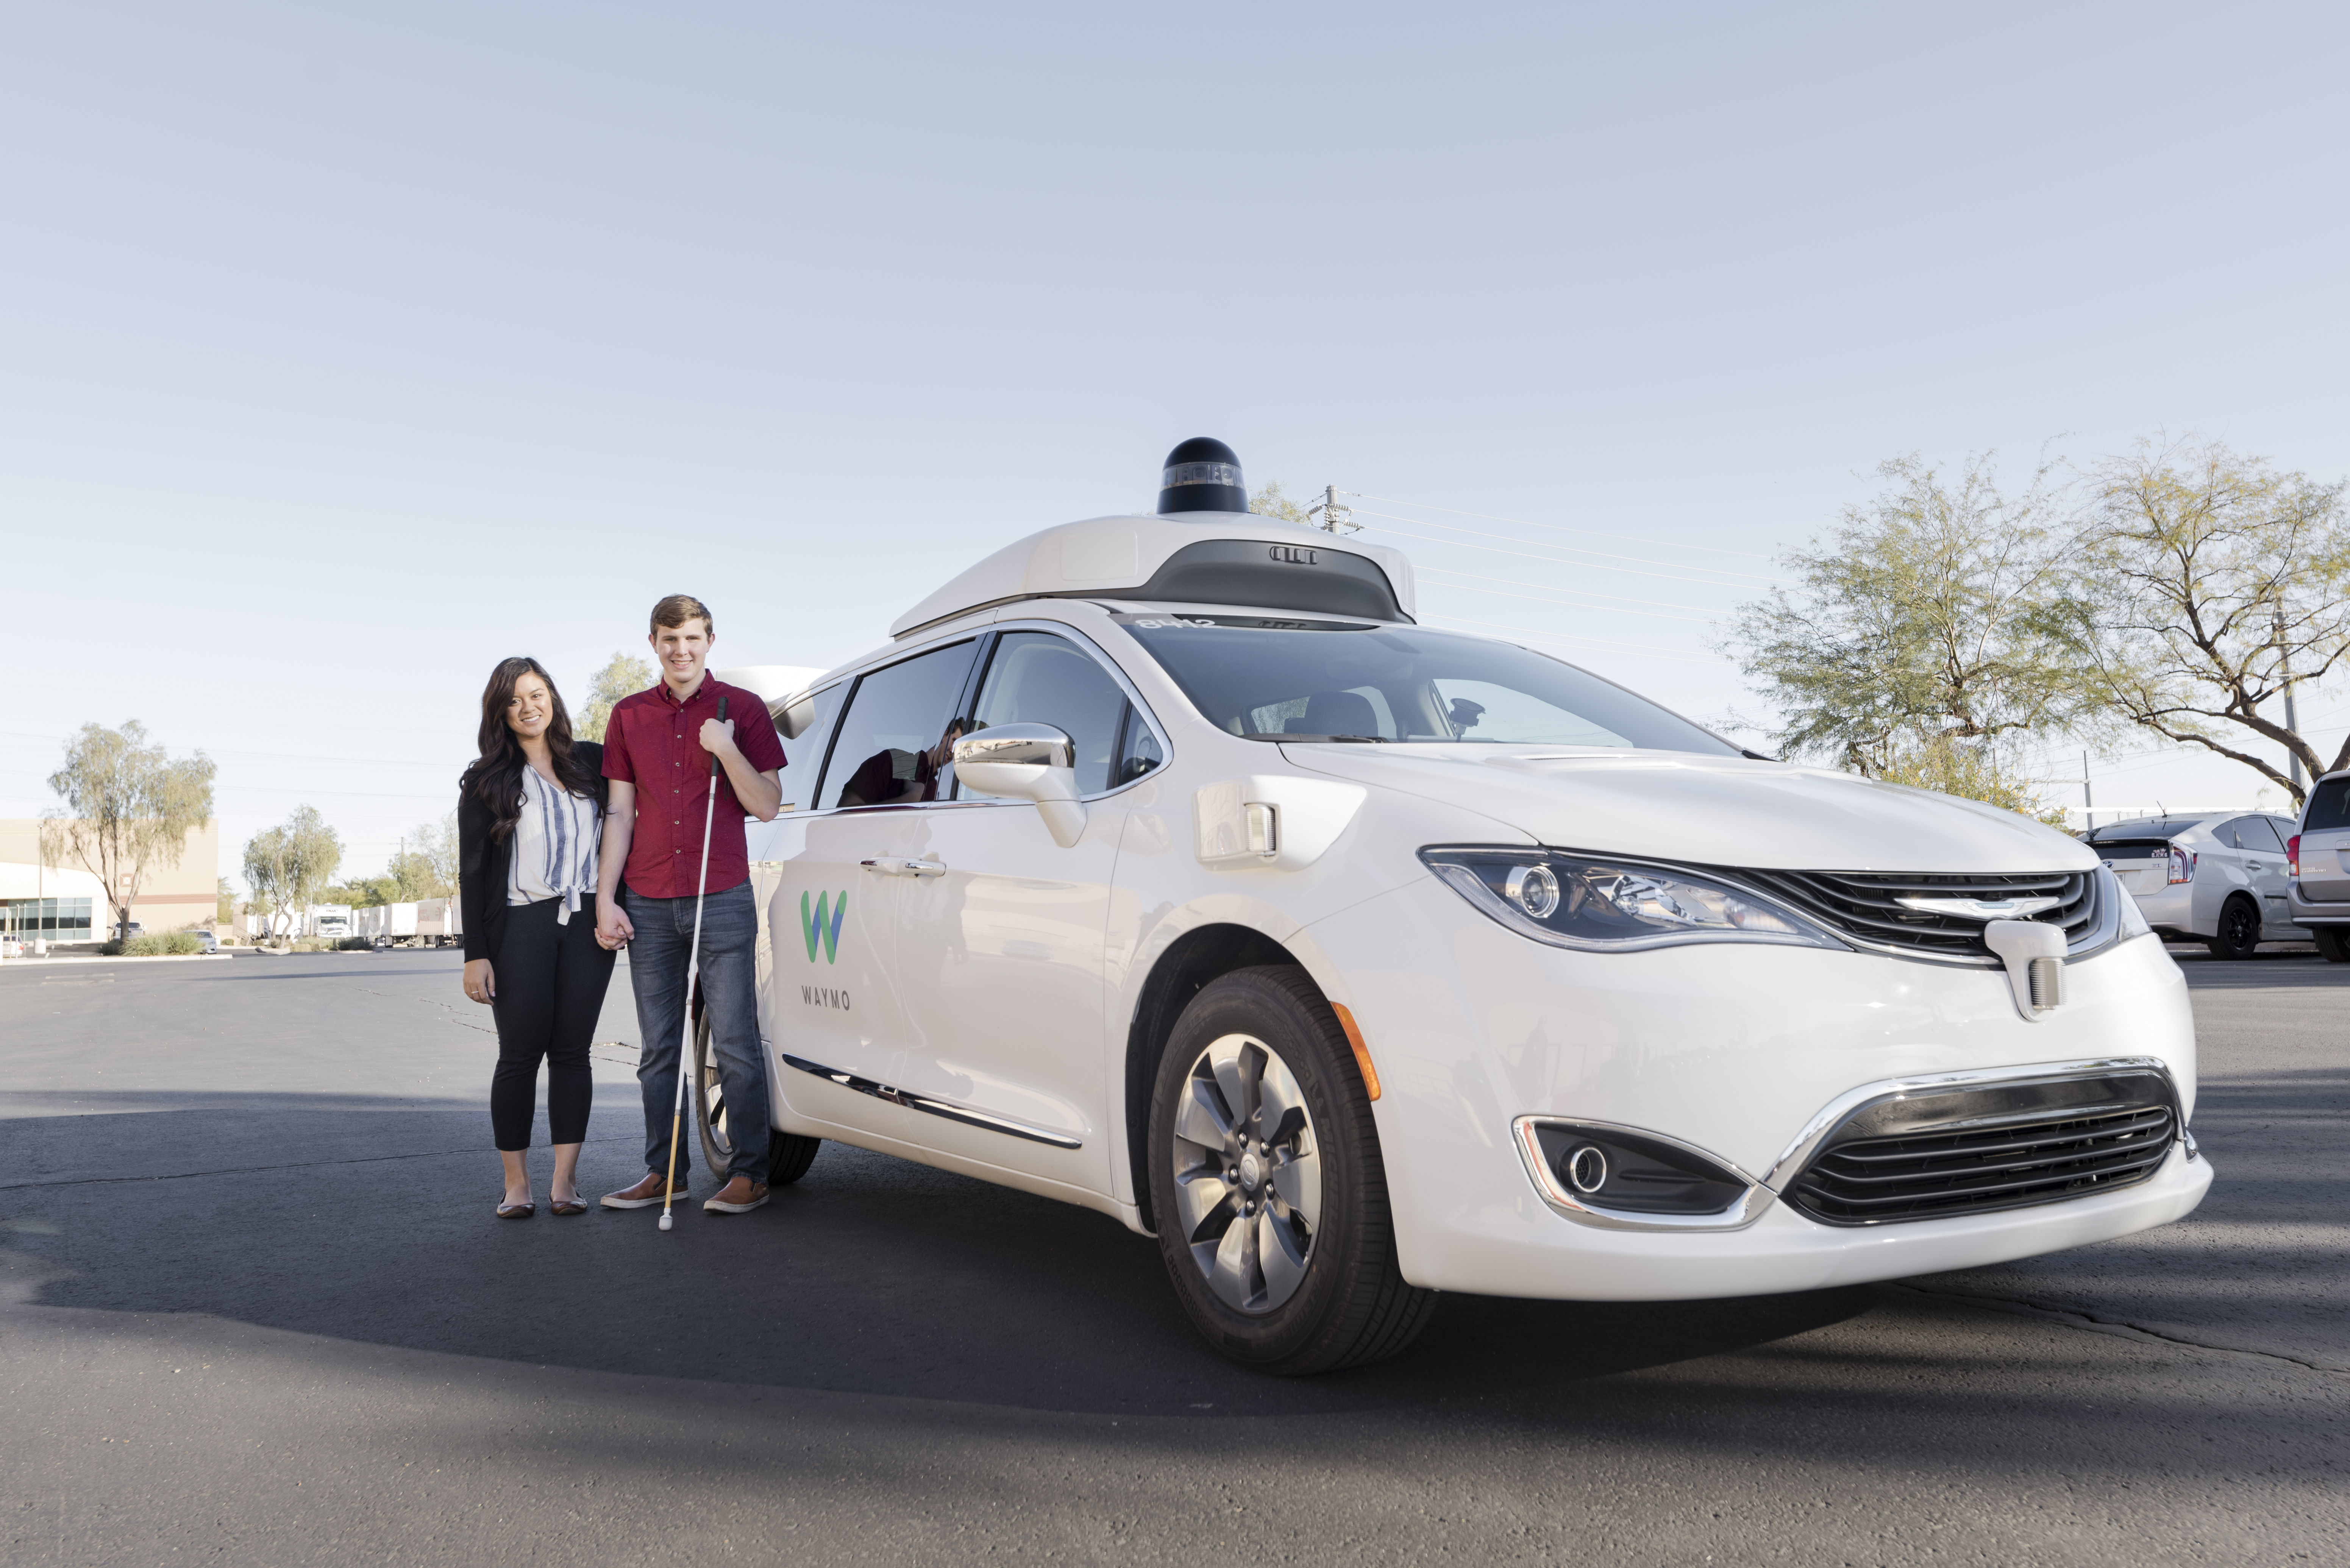 Max and Lillian outside next to a Waymo vehicle